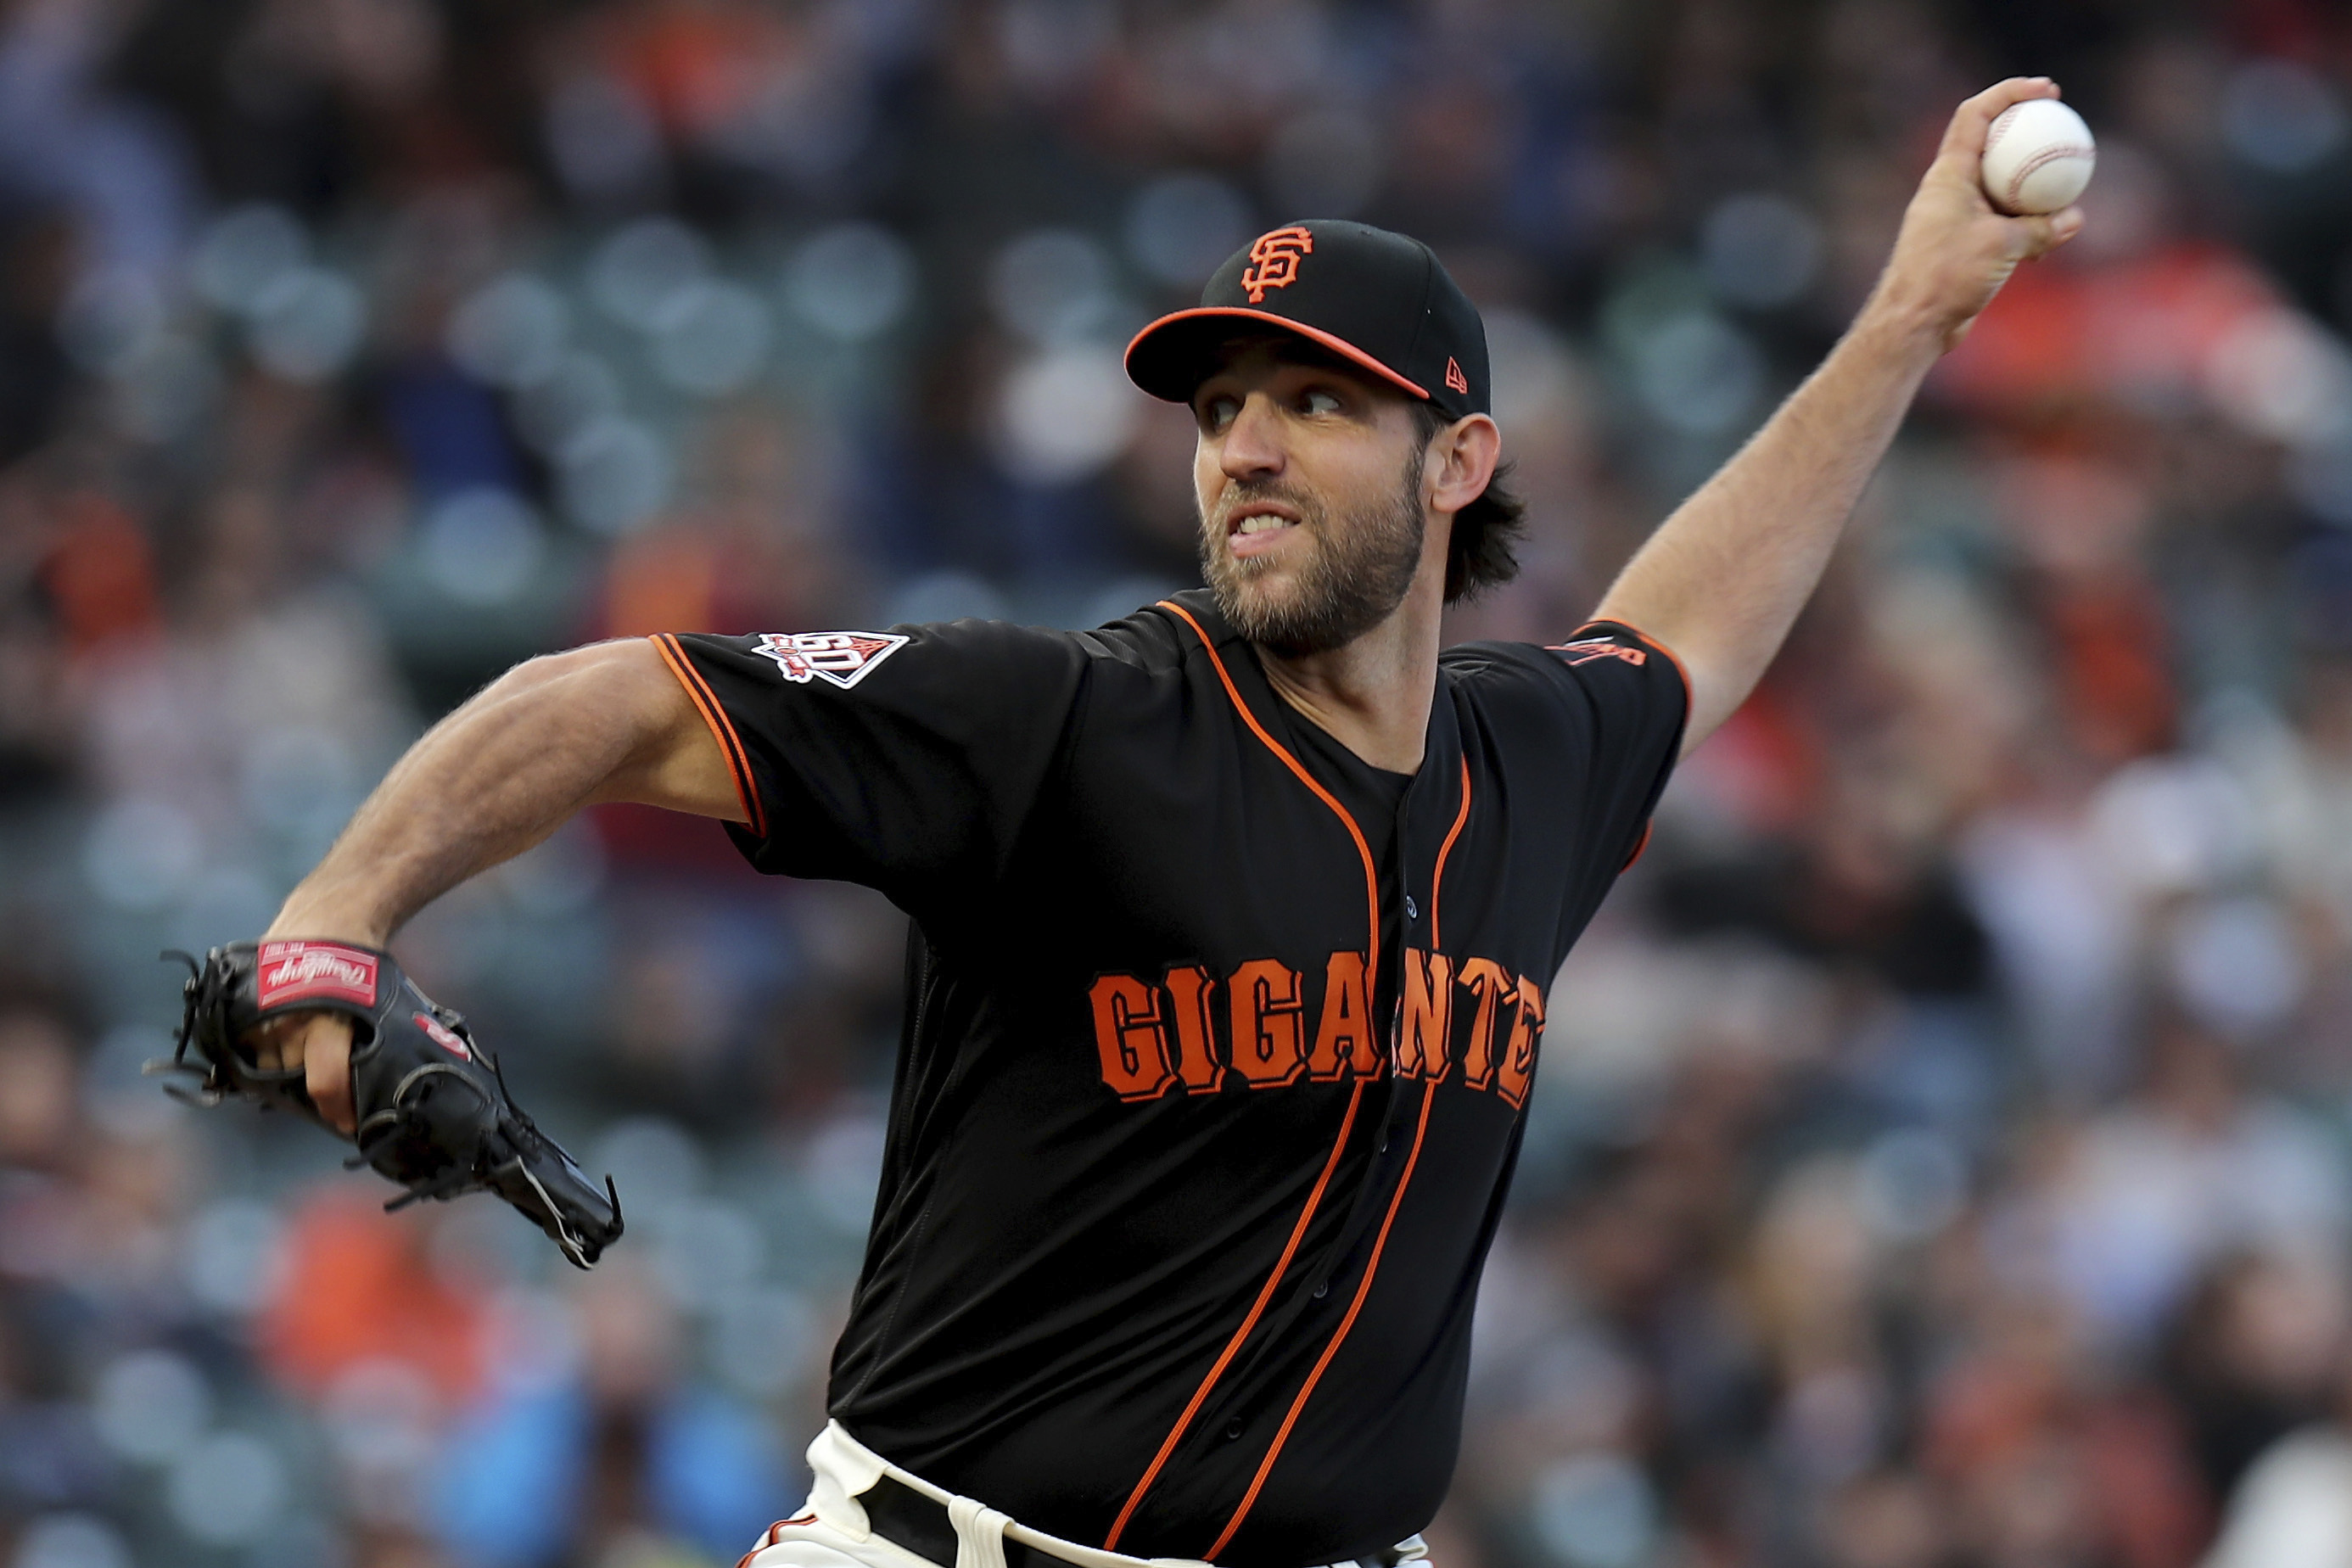 Why Madison Bumgarner could be gamble worth taking for Cardinals